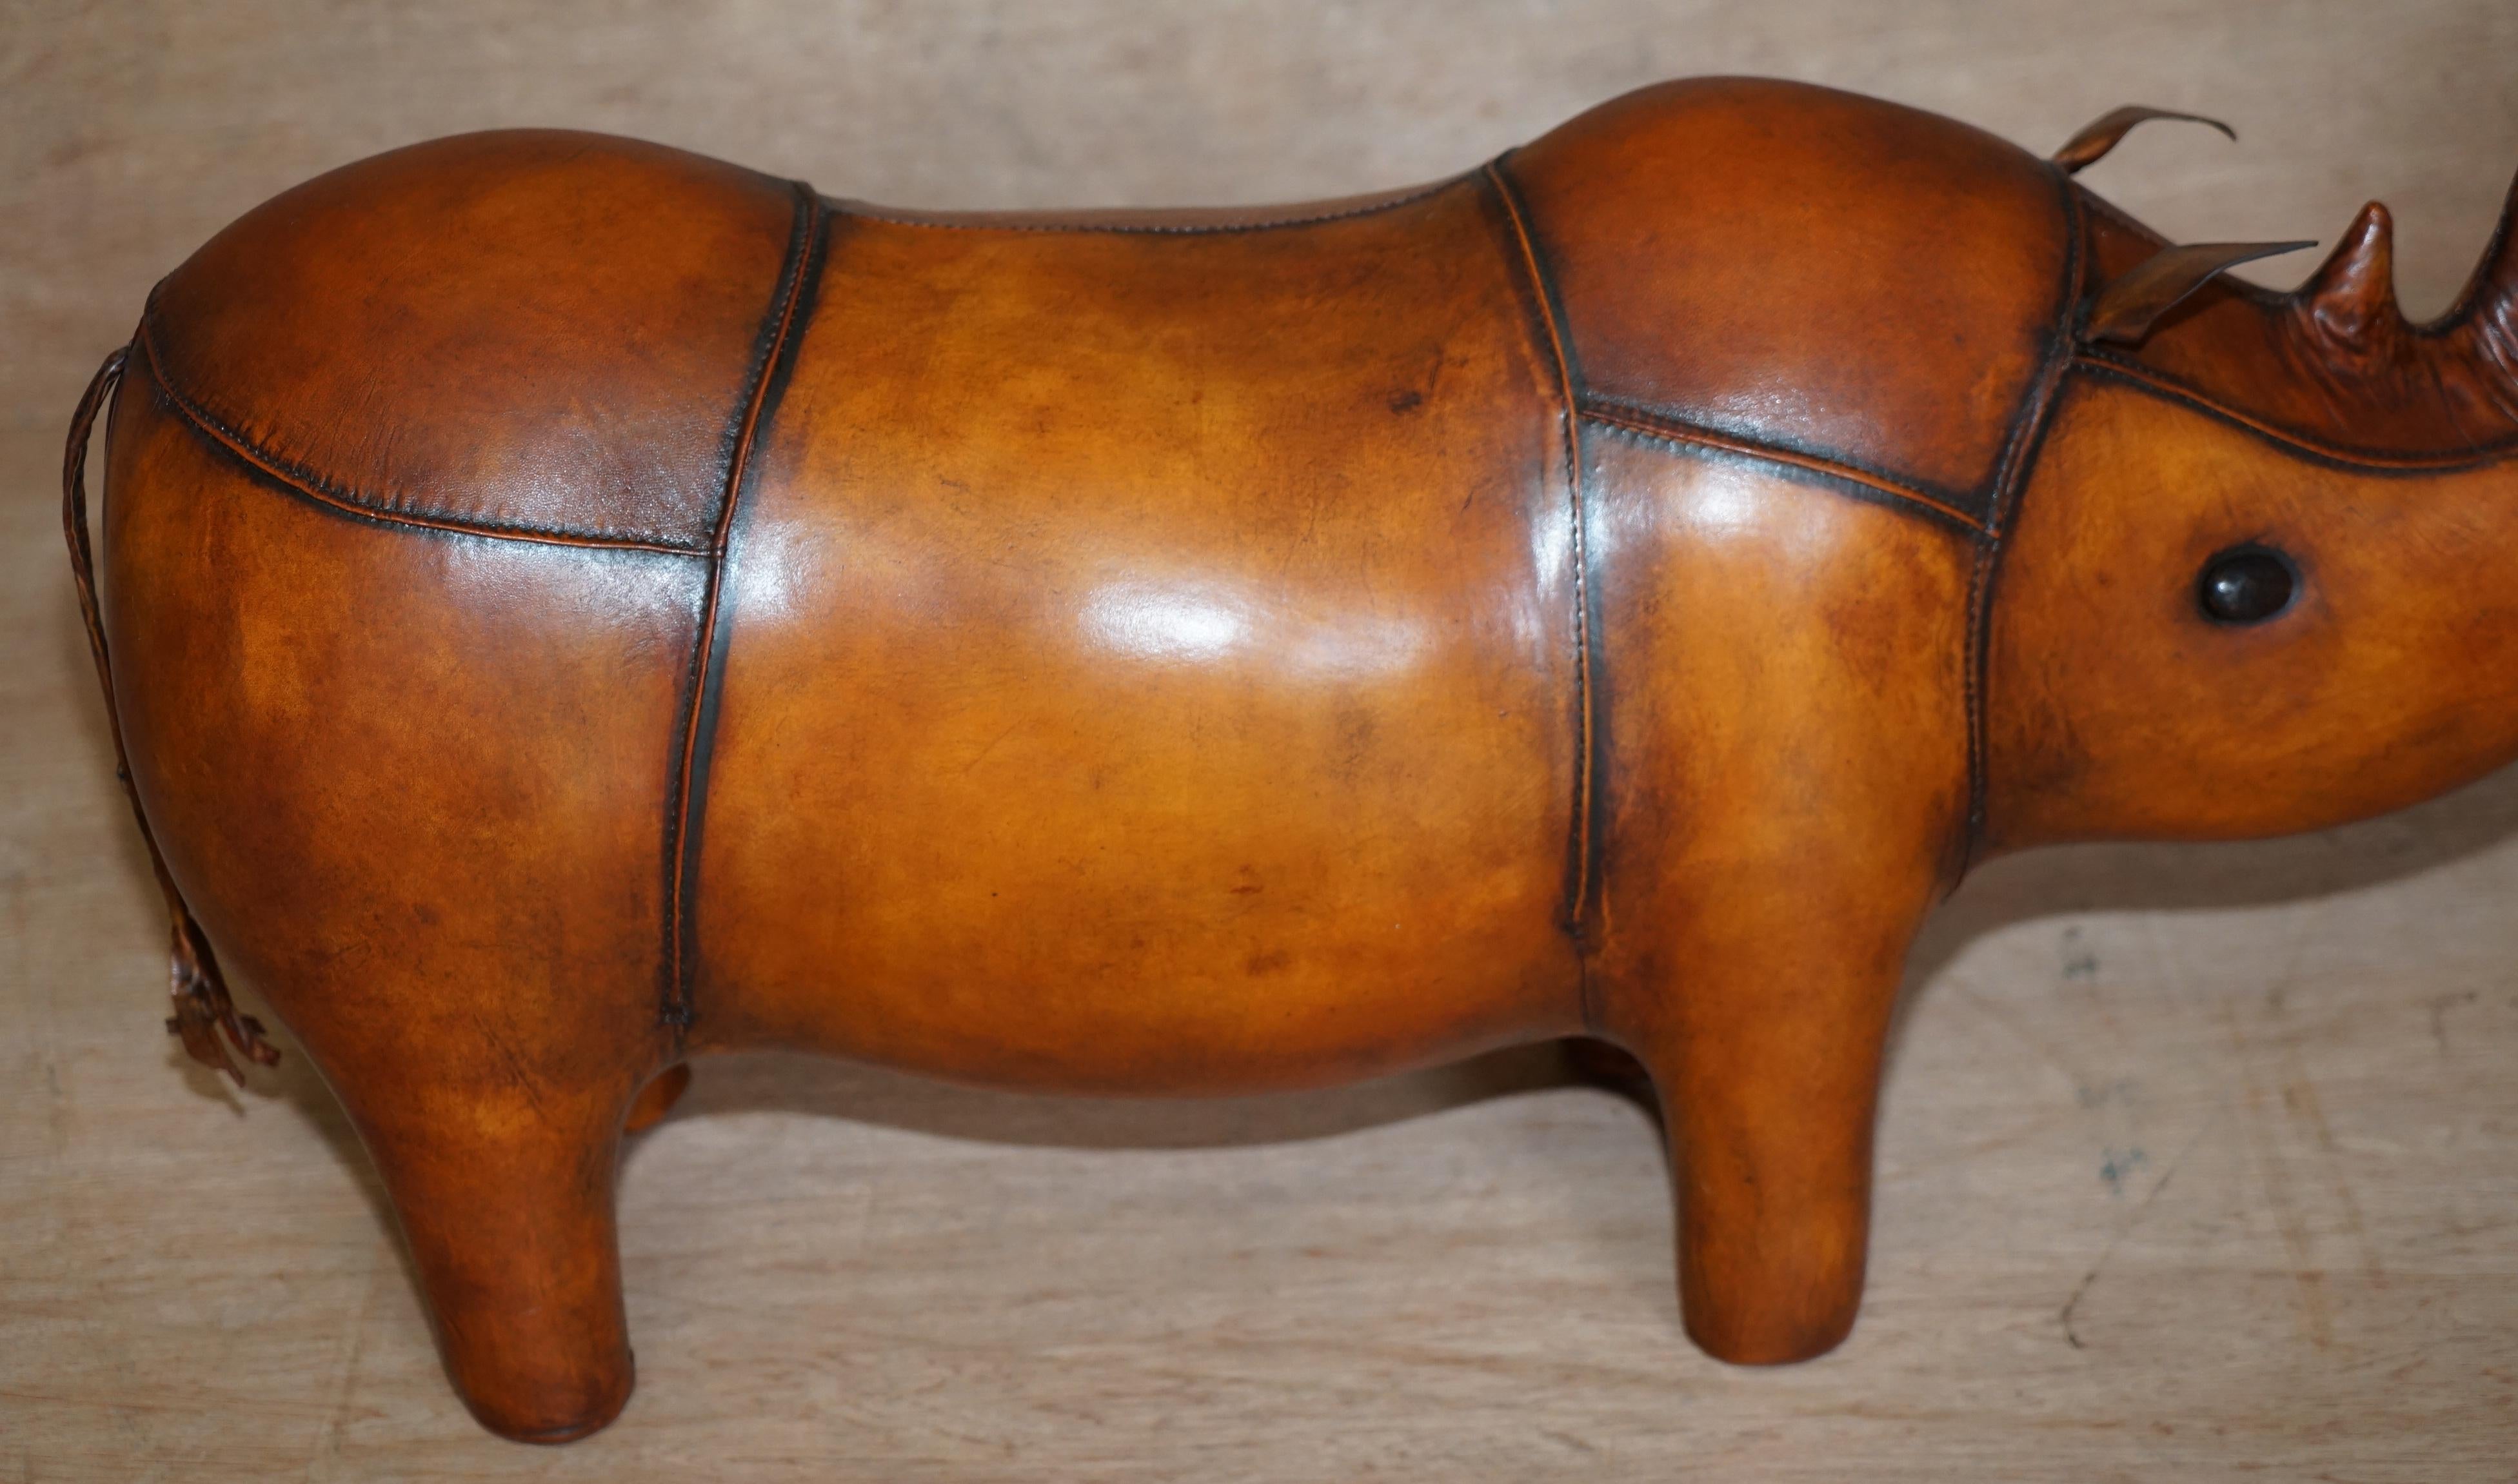 20th Century 1 of 2 New Old Stock Liberty London Style Omersa Brown Leather Footstool Rhino's